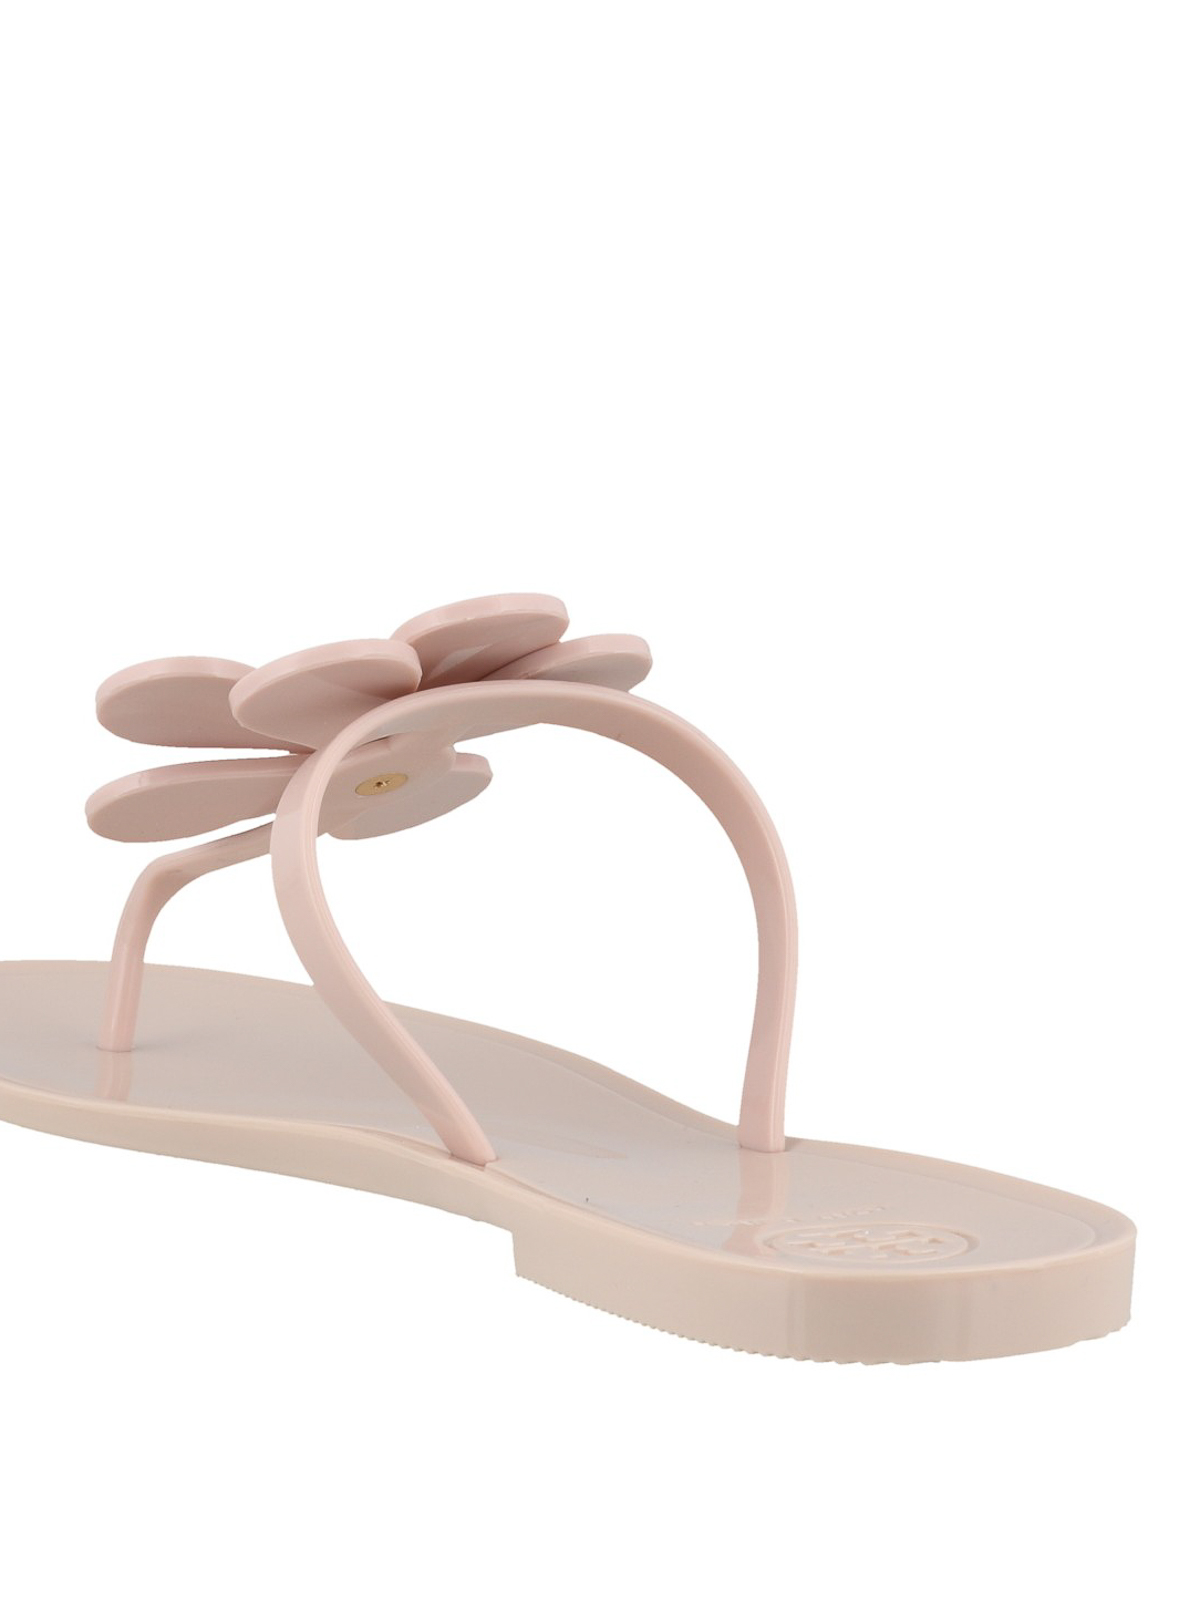 tory burch flower jelly thong sandals